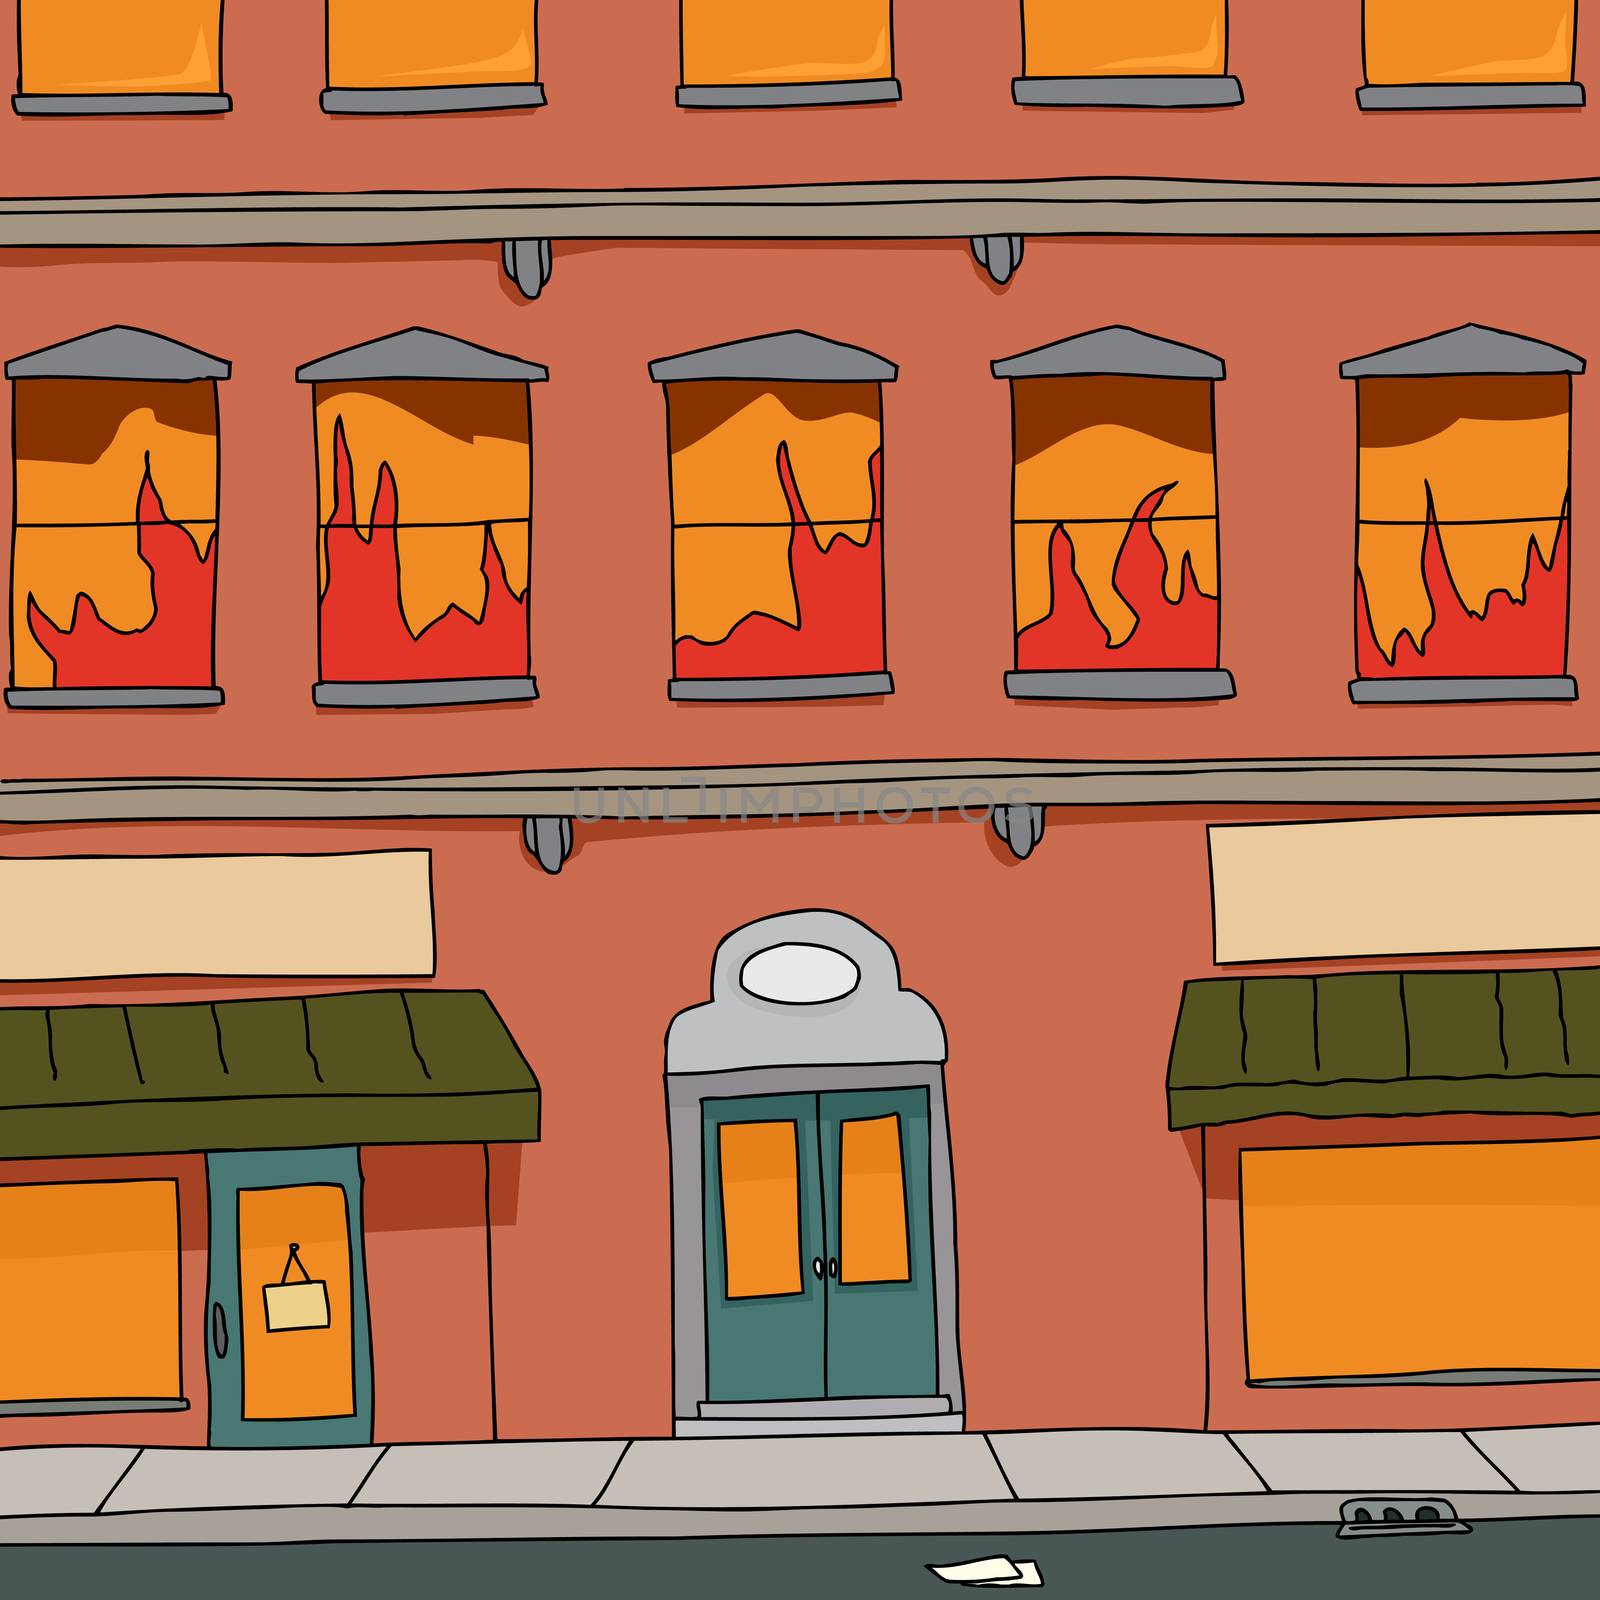 Cartoon of storefront apartment building on fire